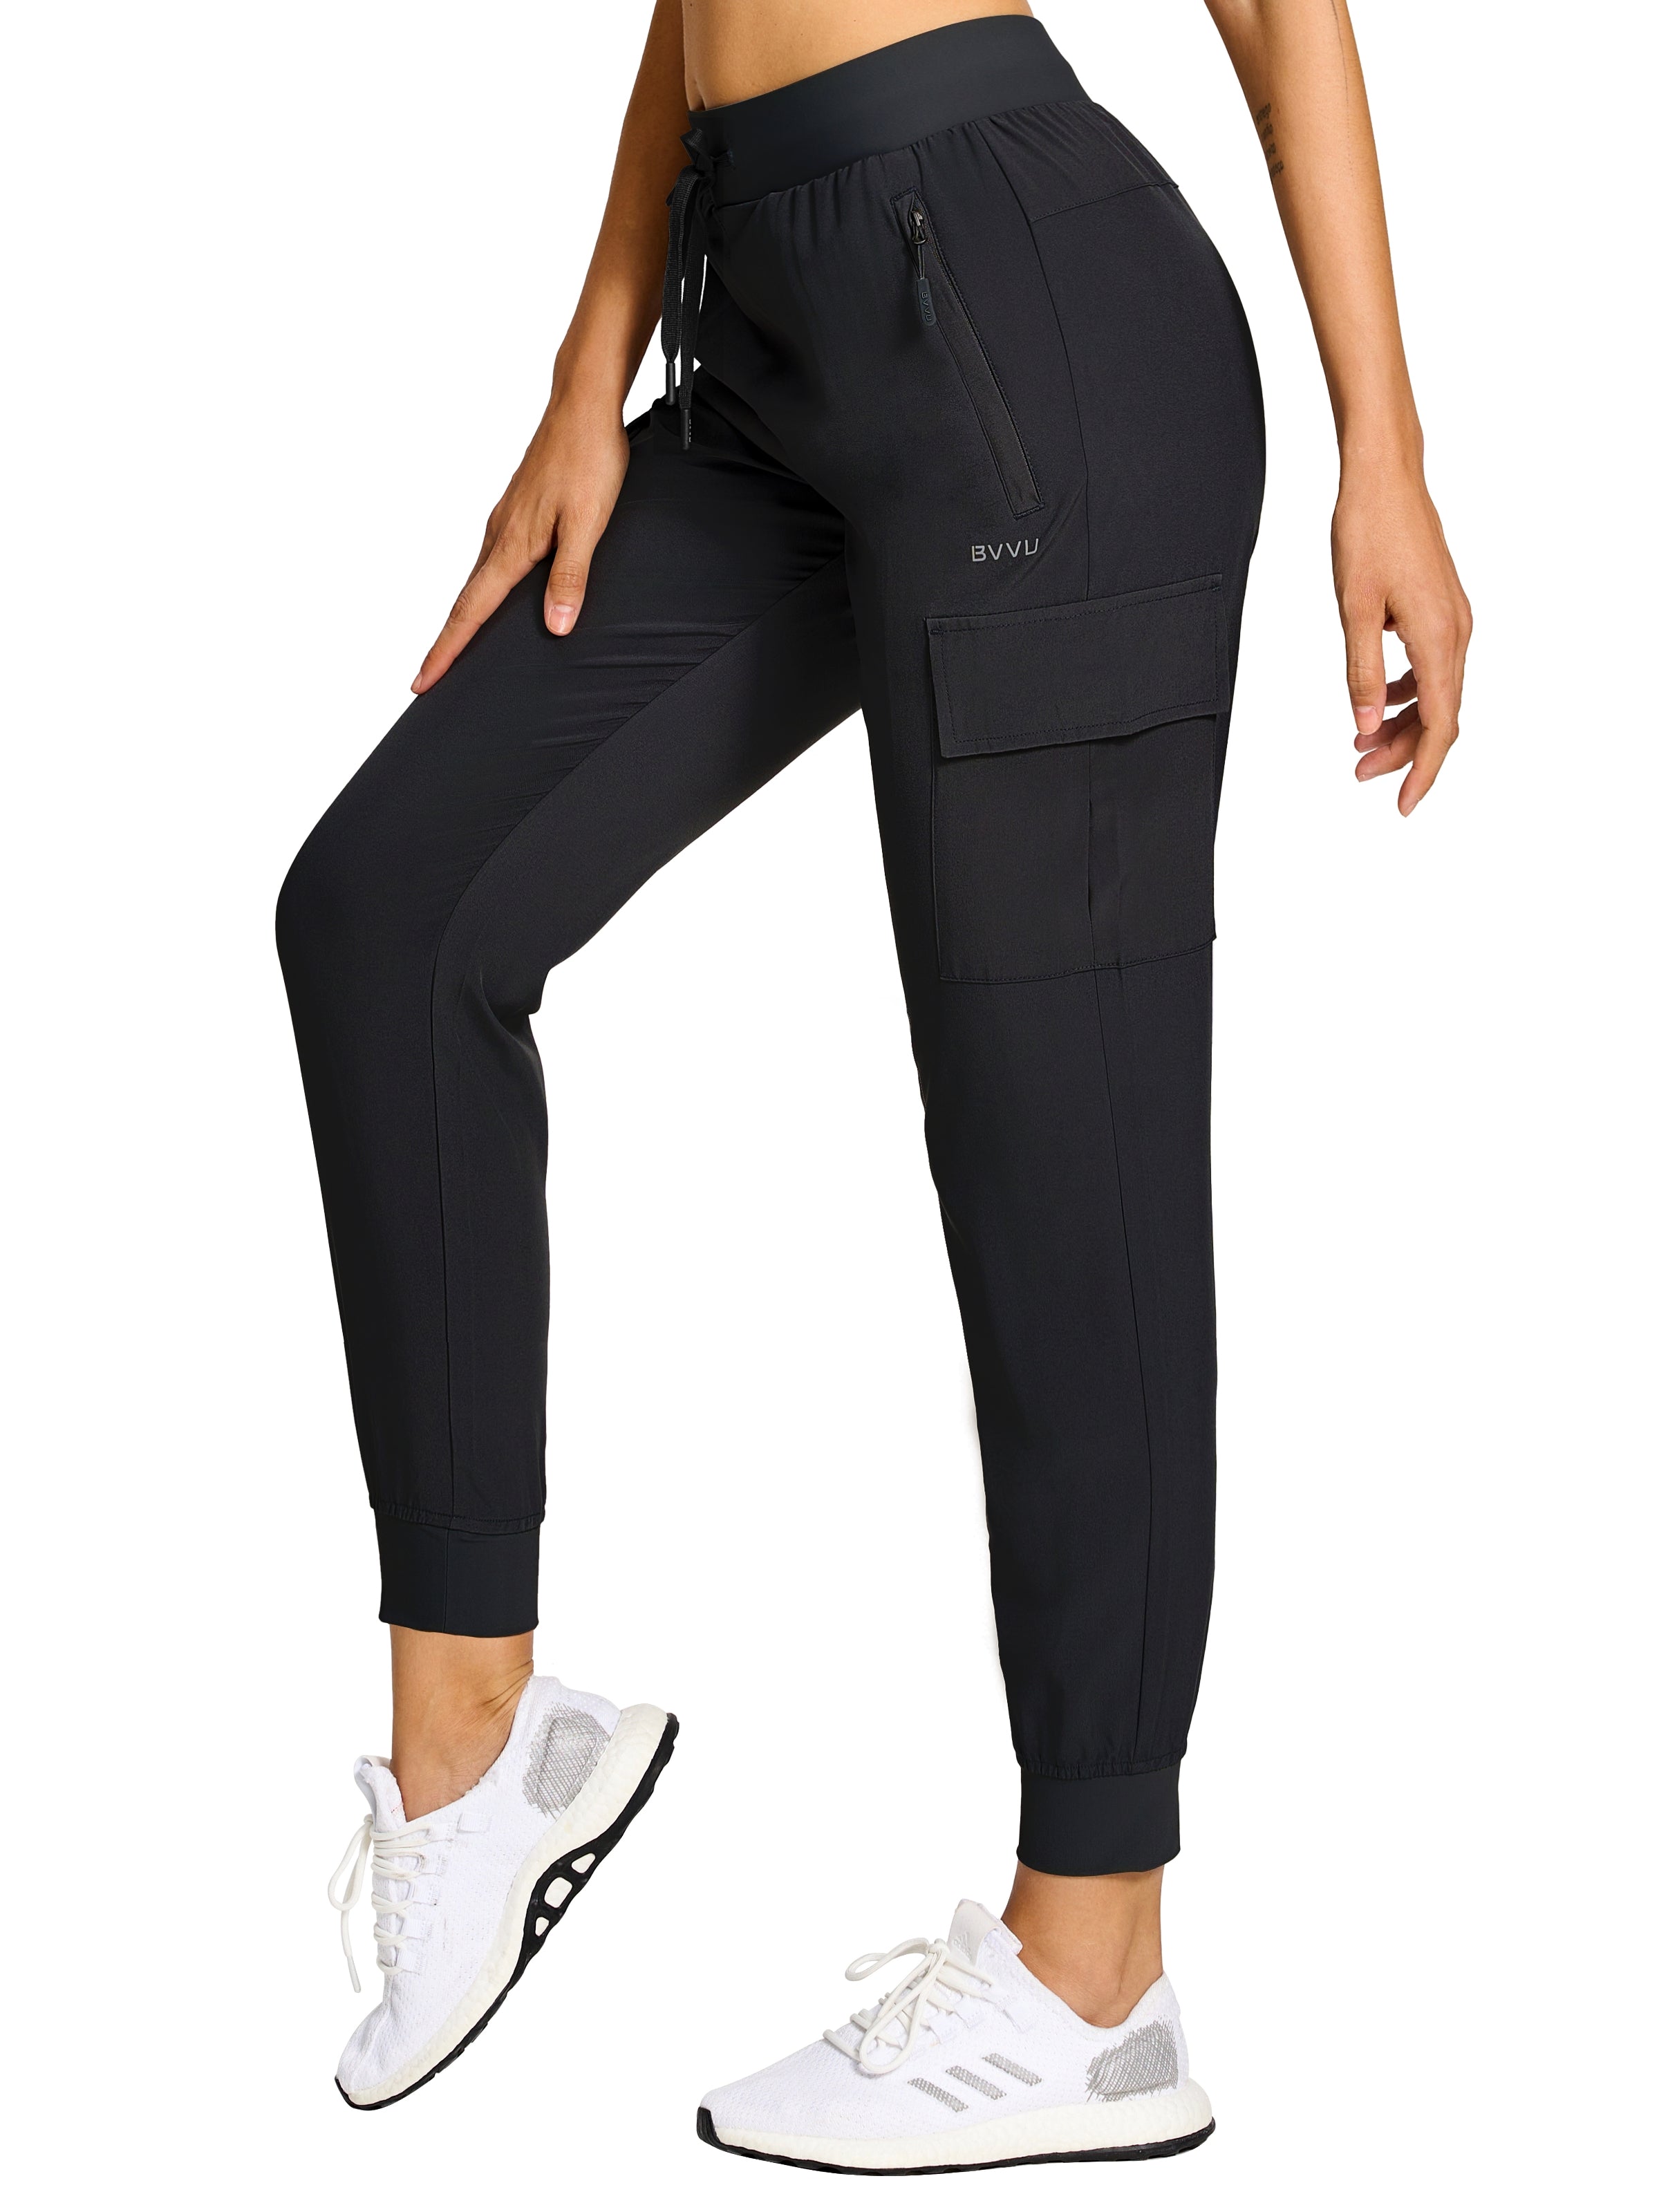 BVVU Women's Cargo Joggers Hiking Pants High Wasited Lightweight Quick Dry with Zipper Pockets Waterproof Athletic Sweatpants